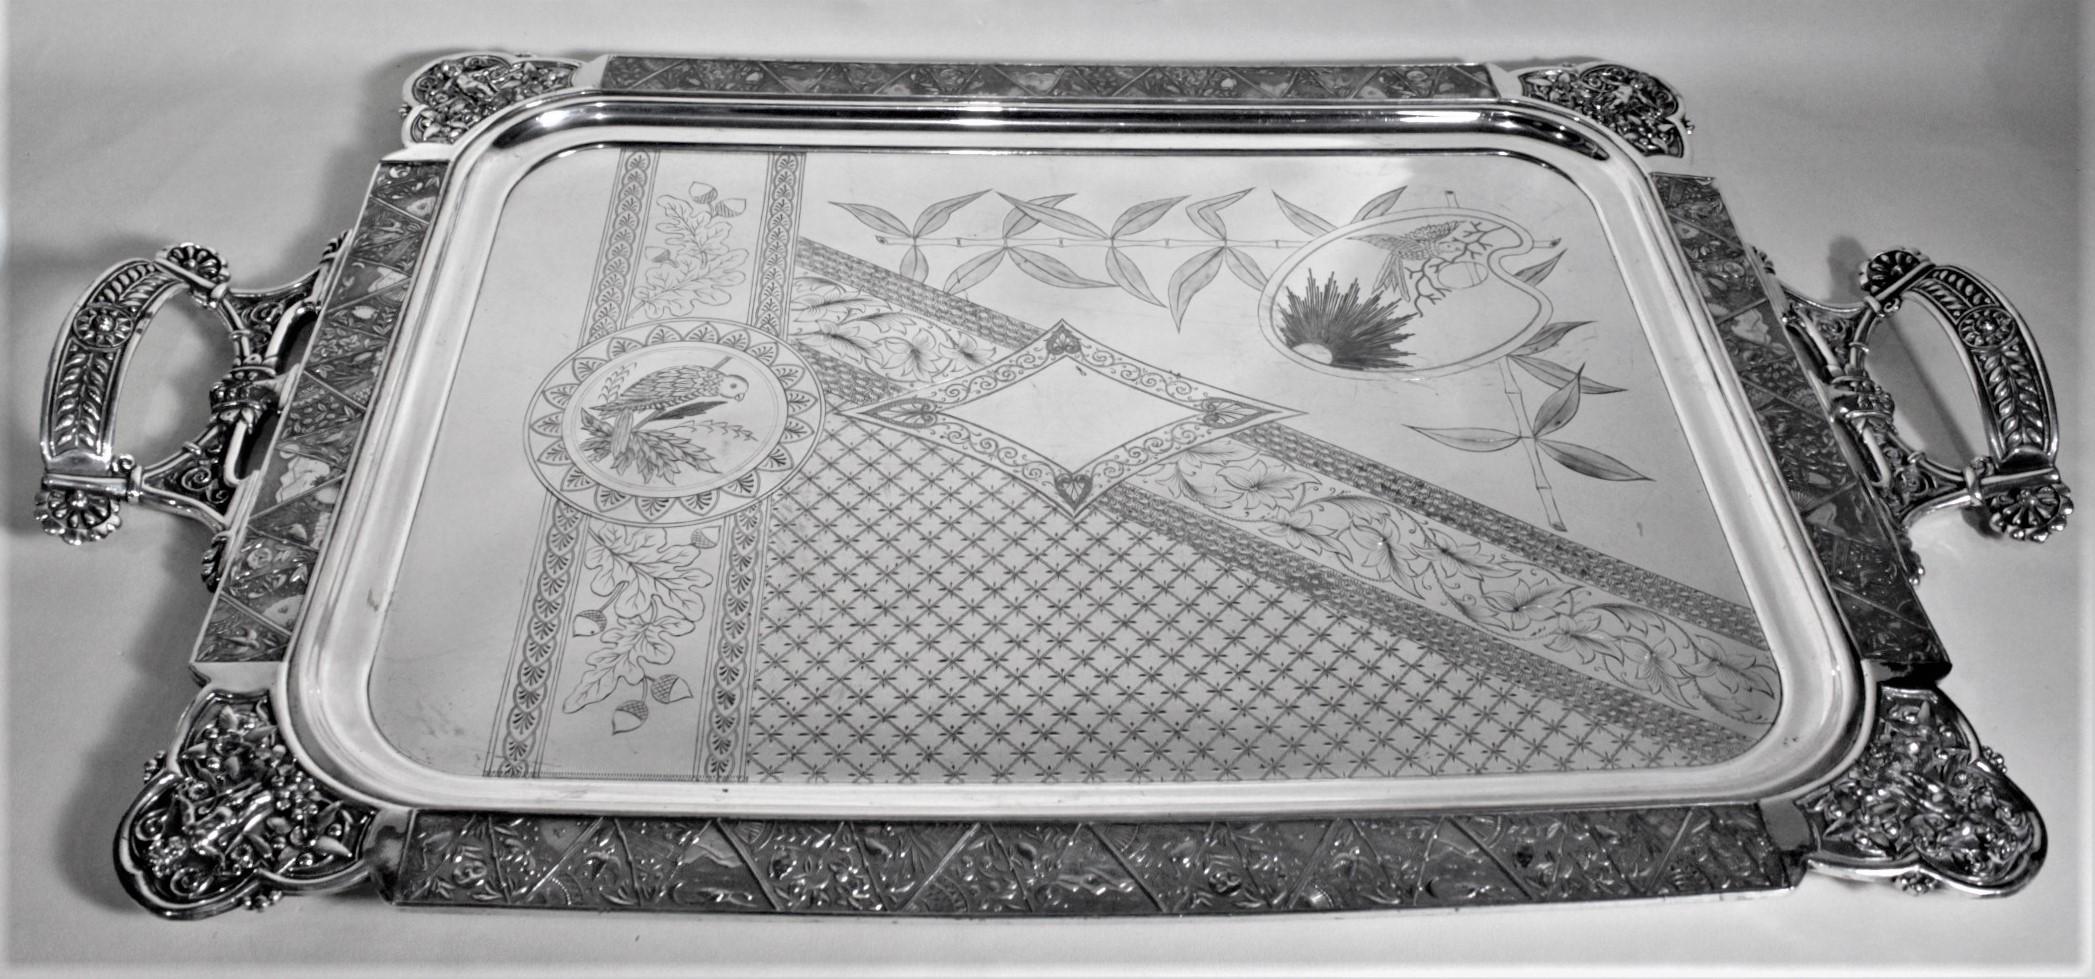 Aesthetic Movement Large Silver Plated Serving Tray with Ornate Engraved Birds, Cherubs and Flowers